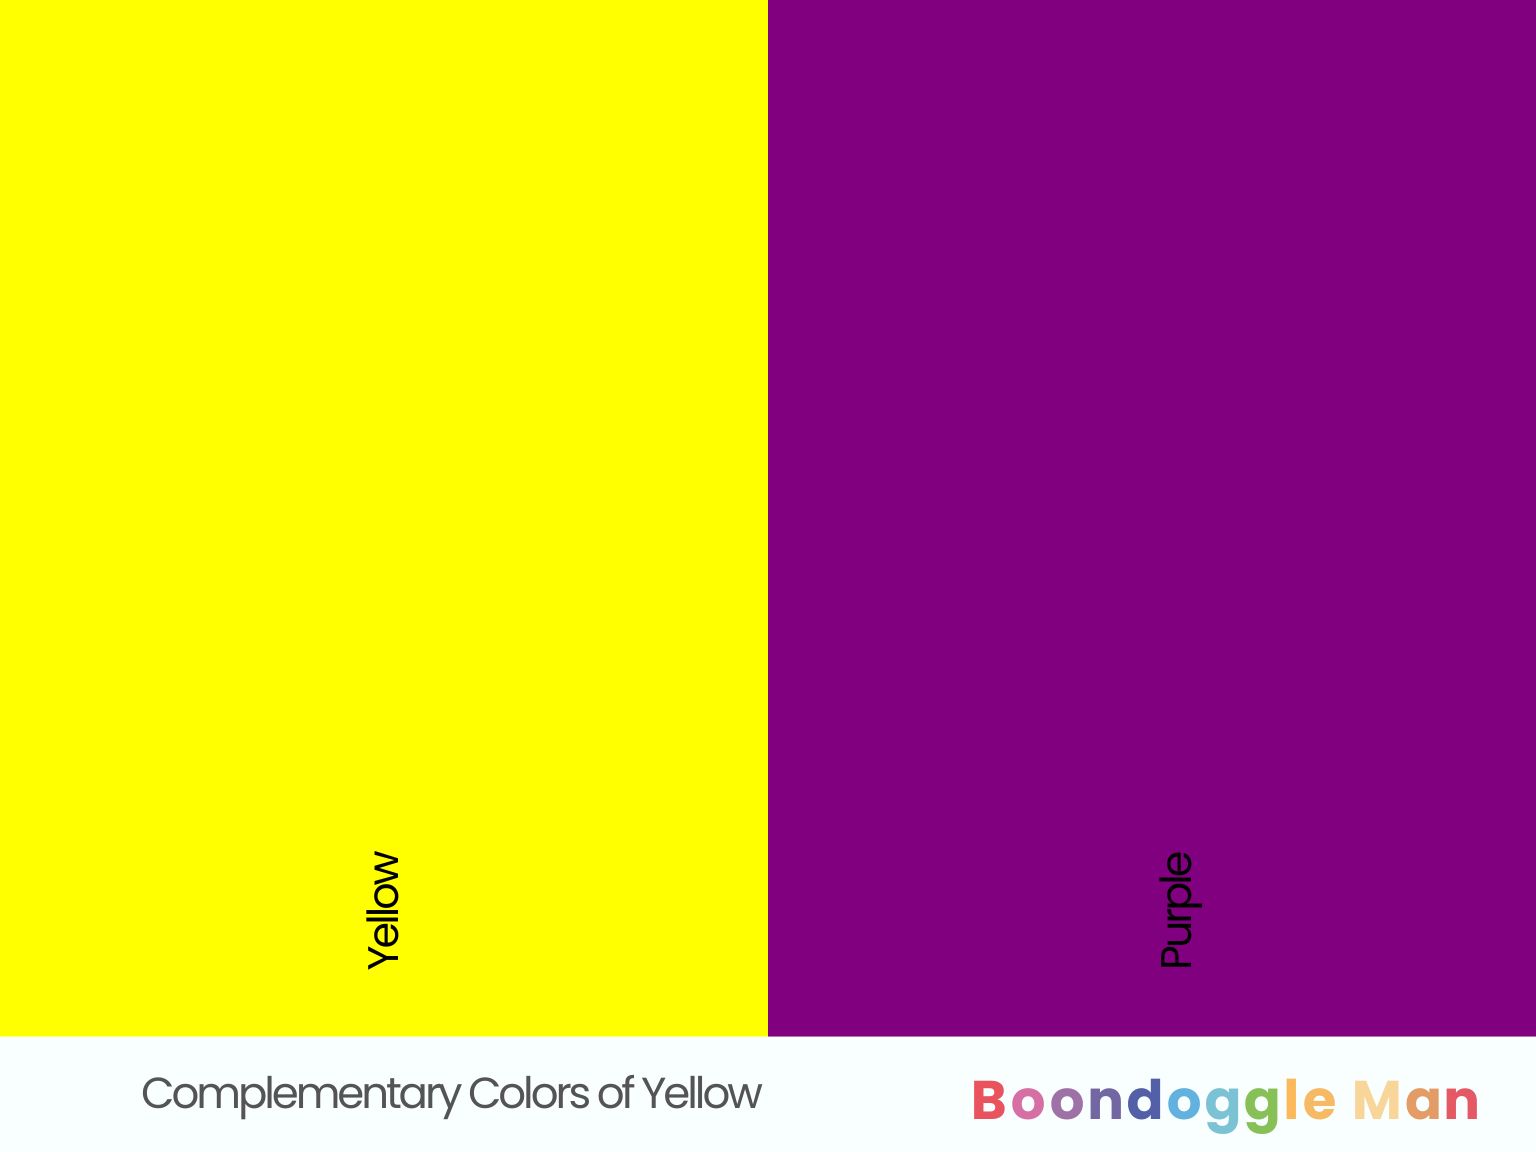 Complementary Colors of Yellow